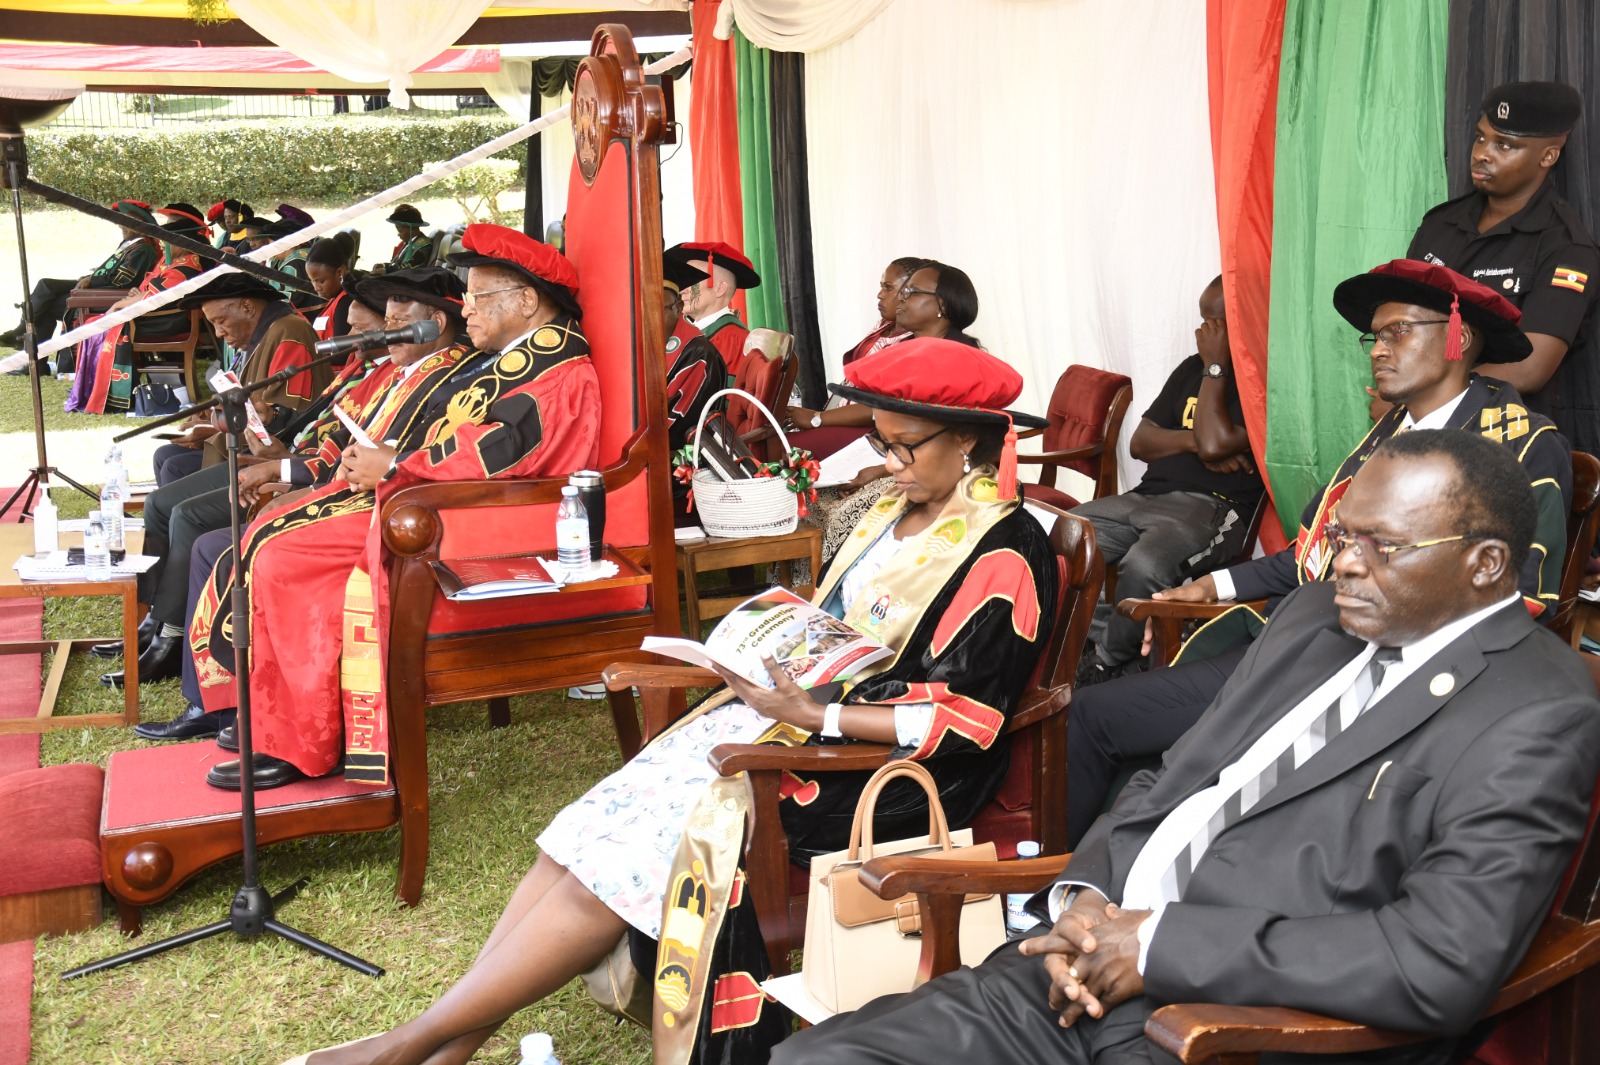 Right to Left: The Chief Justice-Hon. Justice Alfonse Owiny-Dollo, Chairperson of Council-Mrs. Lorna Magara, Chancellor-Prof. Ezra Suruma, Vice Chancellor-Prof. Barnabas Nawangwe, DVCAA-Prof. Umar Kakumba, DVCFA-Prof. Henry Alinaitwe and other dignitaries on Day 1 of the 73rd Graduation Ceremony, Freedom Square, Makerere University.